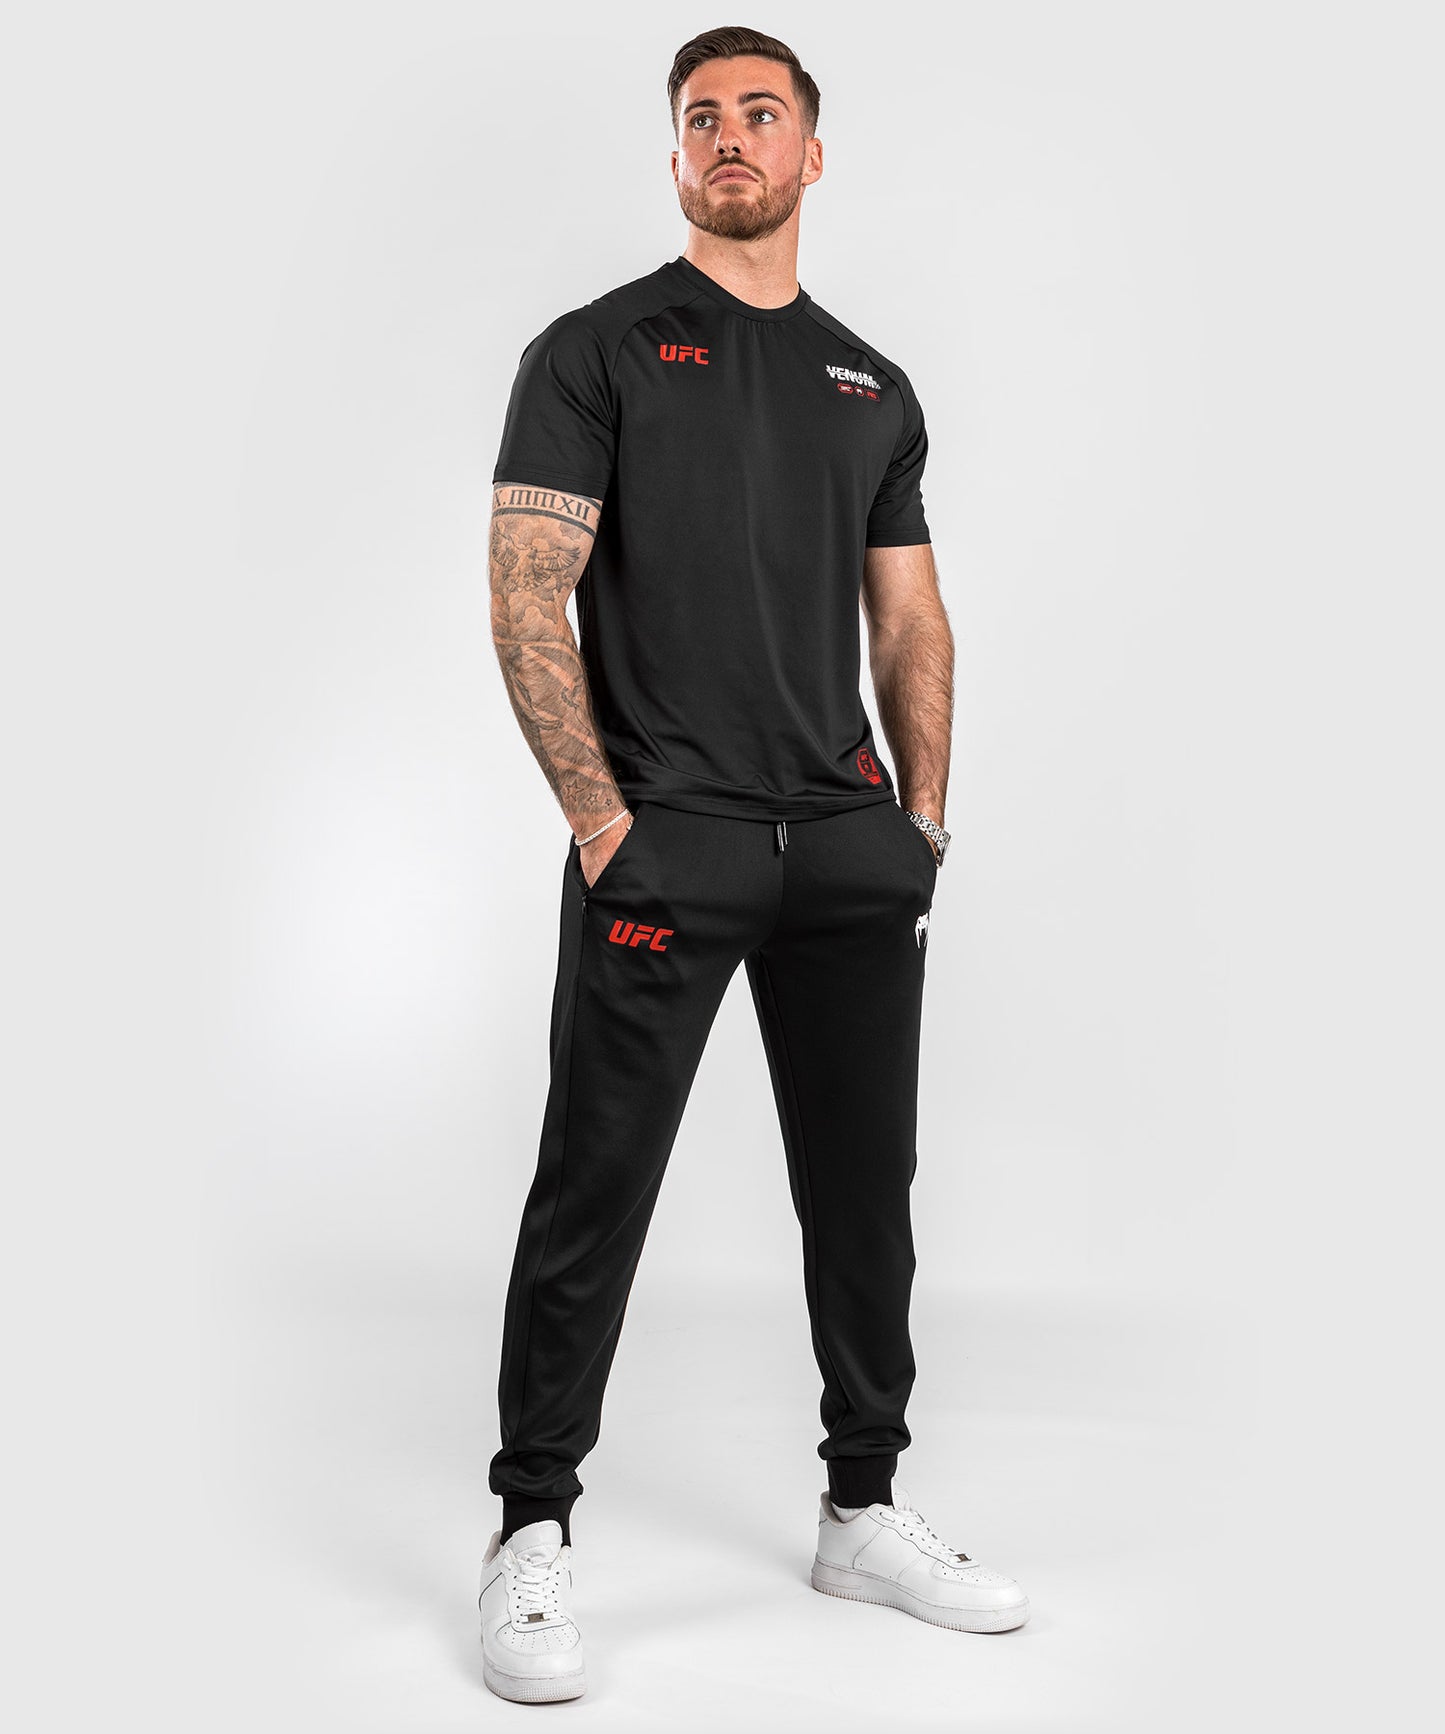 Best Venum Joggers: Combat-Ready Fashion Meets Relaxation